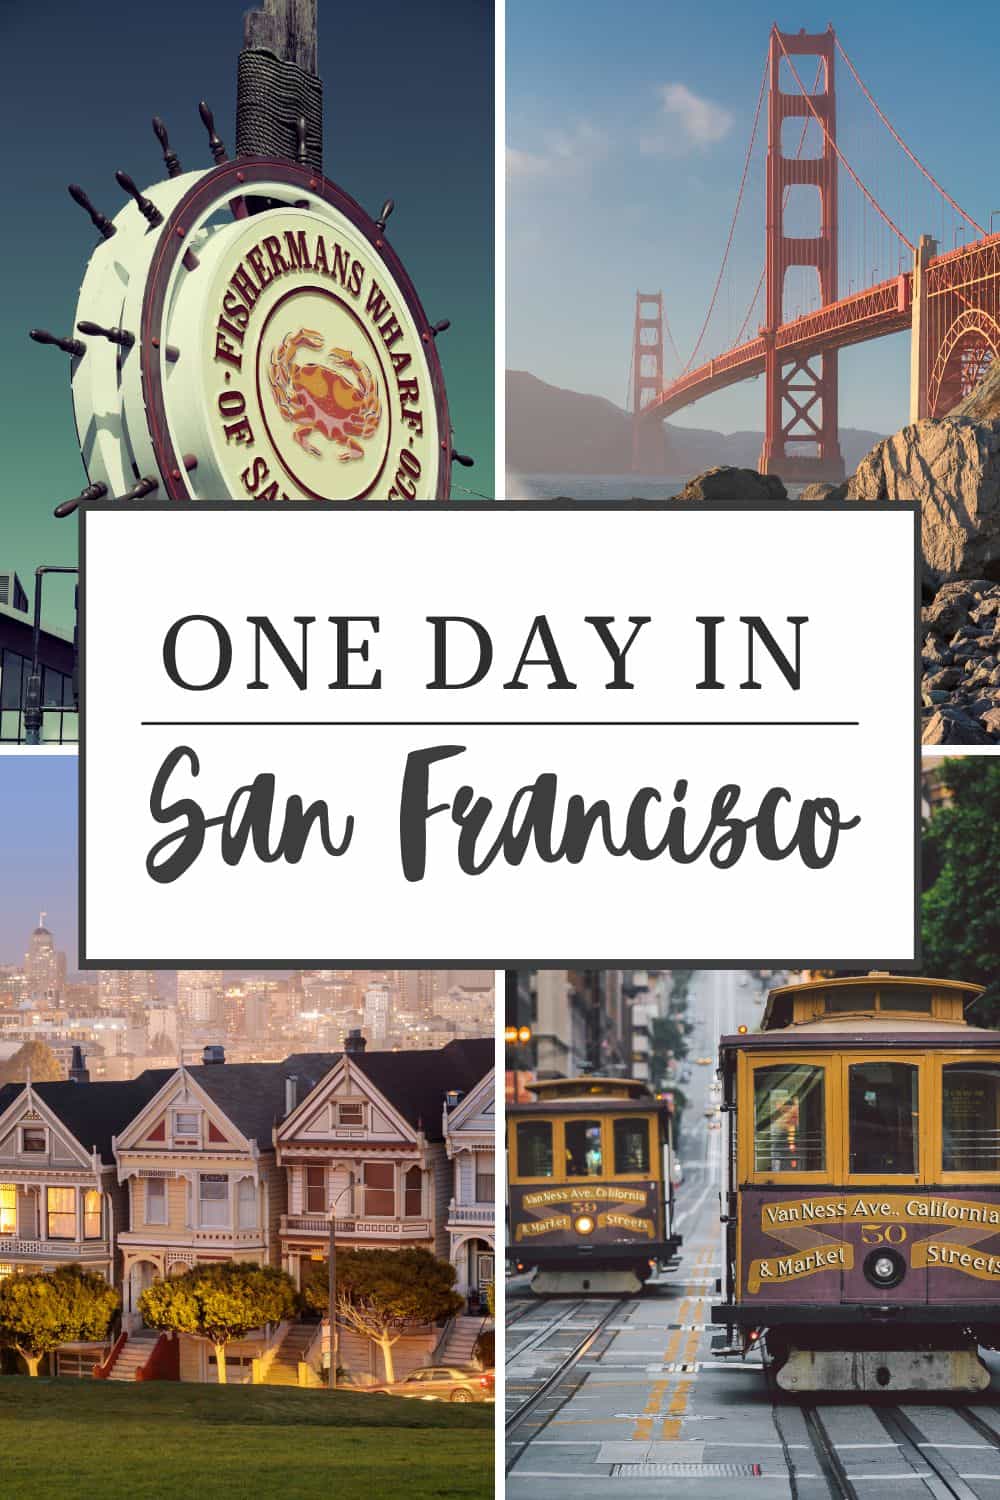 One Day in San Francisco